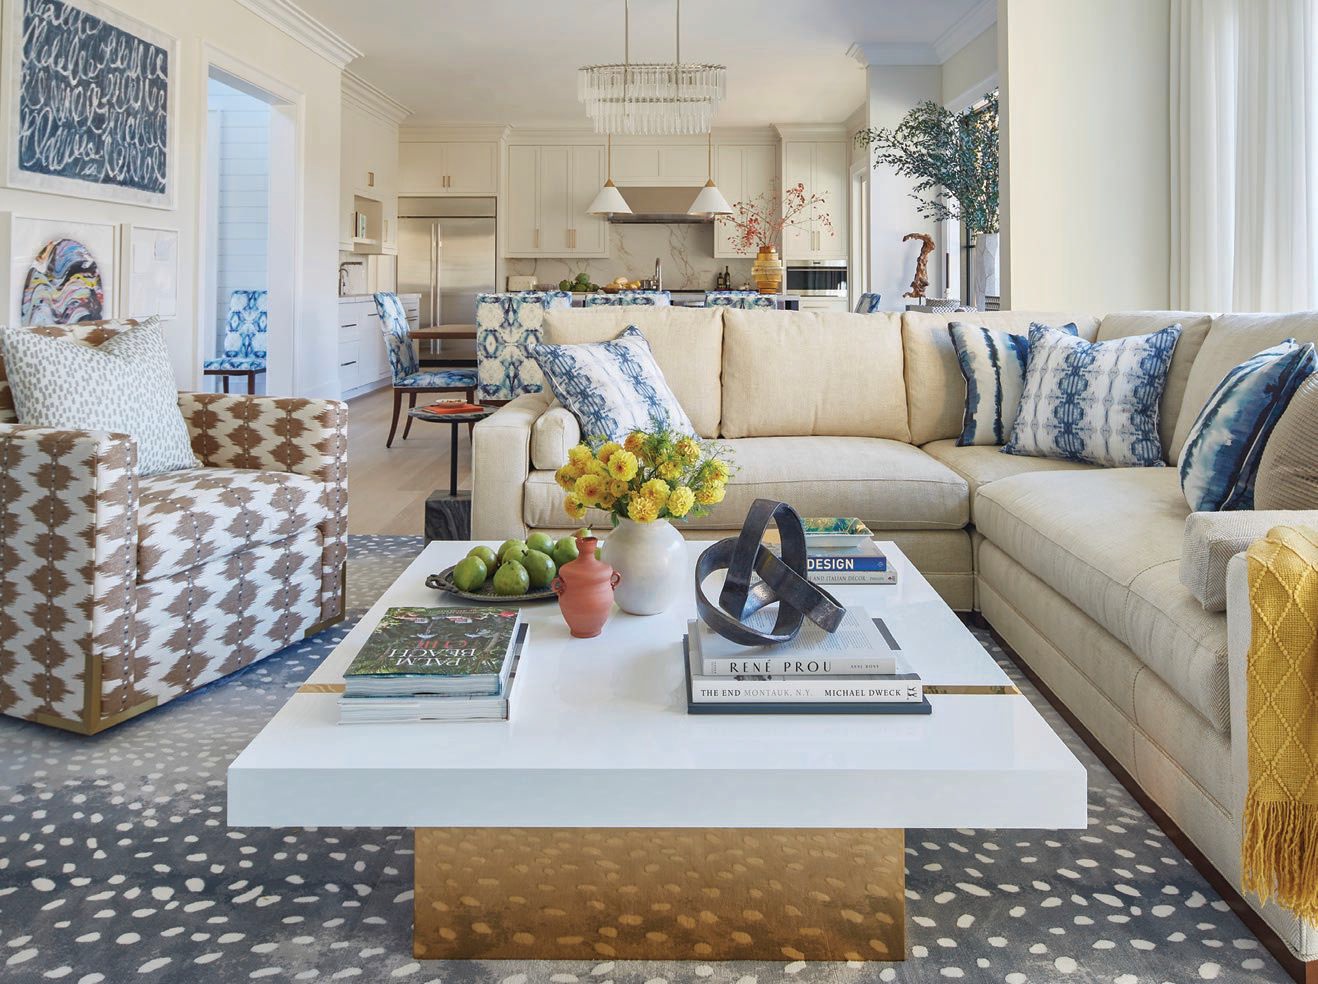 The living room is pattern central with help from accent pillows, artwork, furniture and more PHOTOGRAPHED BY JACOB SNAVELY